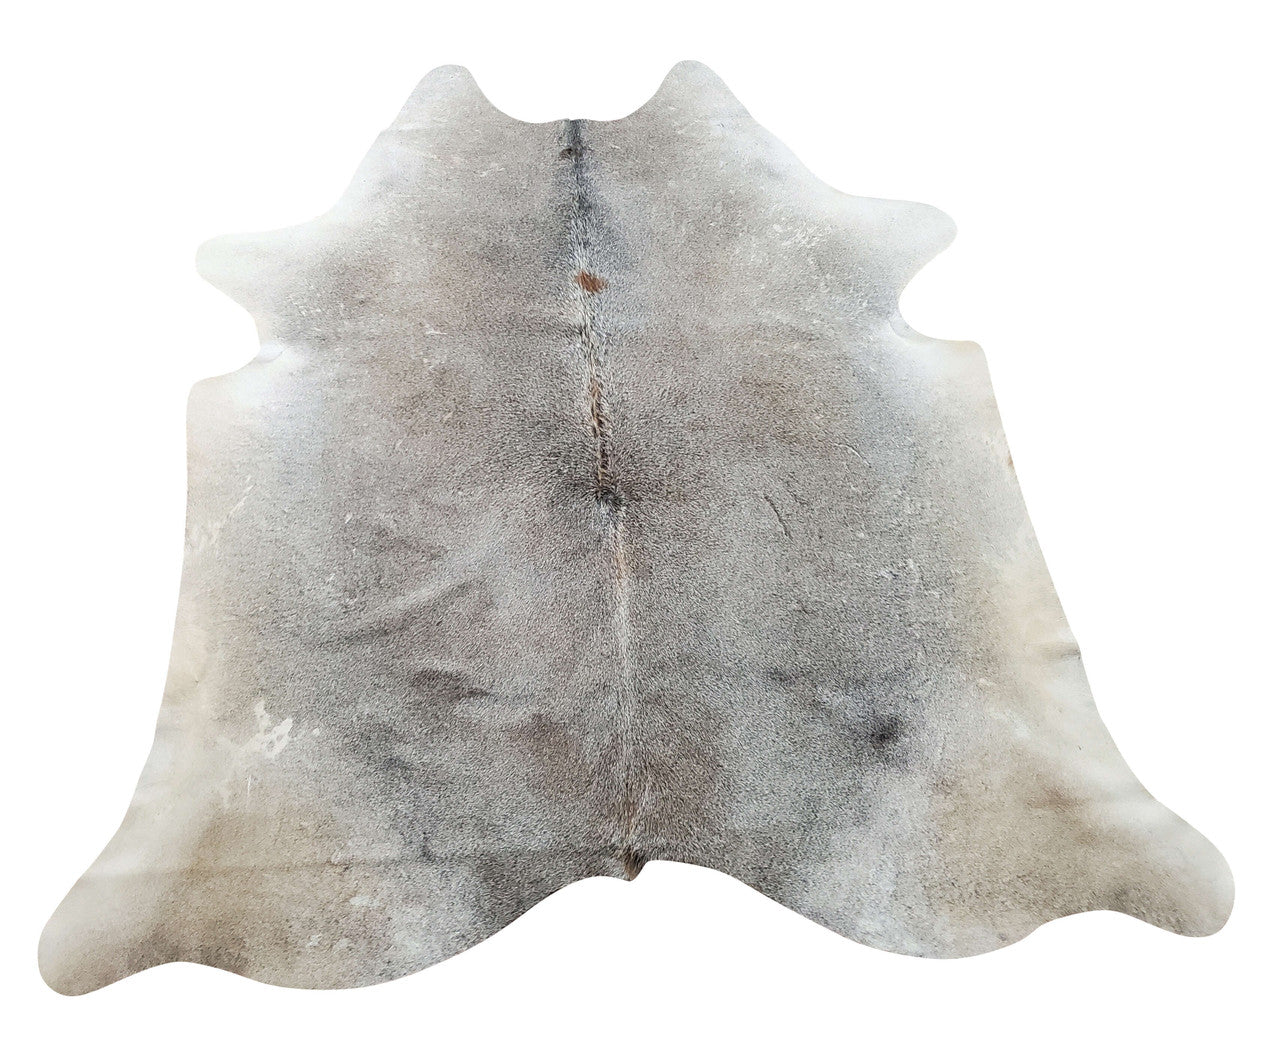 The cowhide rug I ordered to the touch of my hand was exquisitely made and amazingly beautiful. Its grey tone worked out perfectly, get in four days anywhere in Canada
